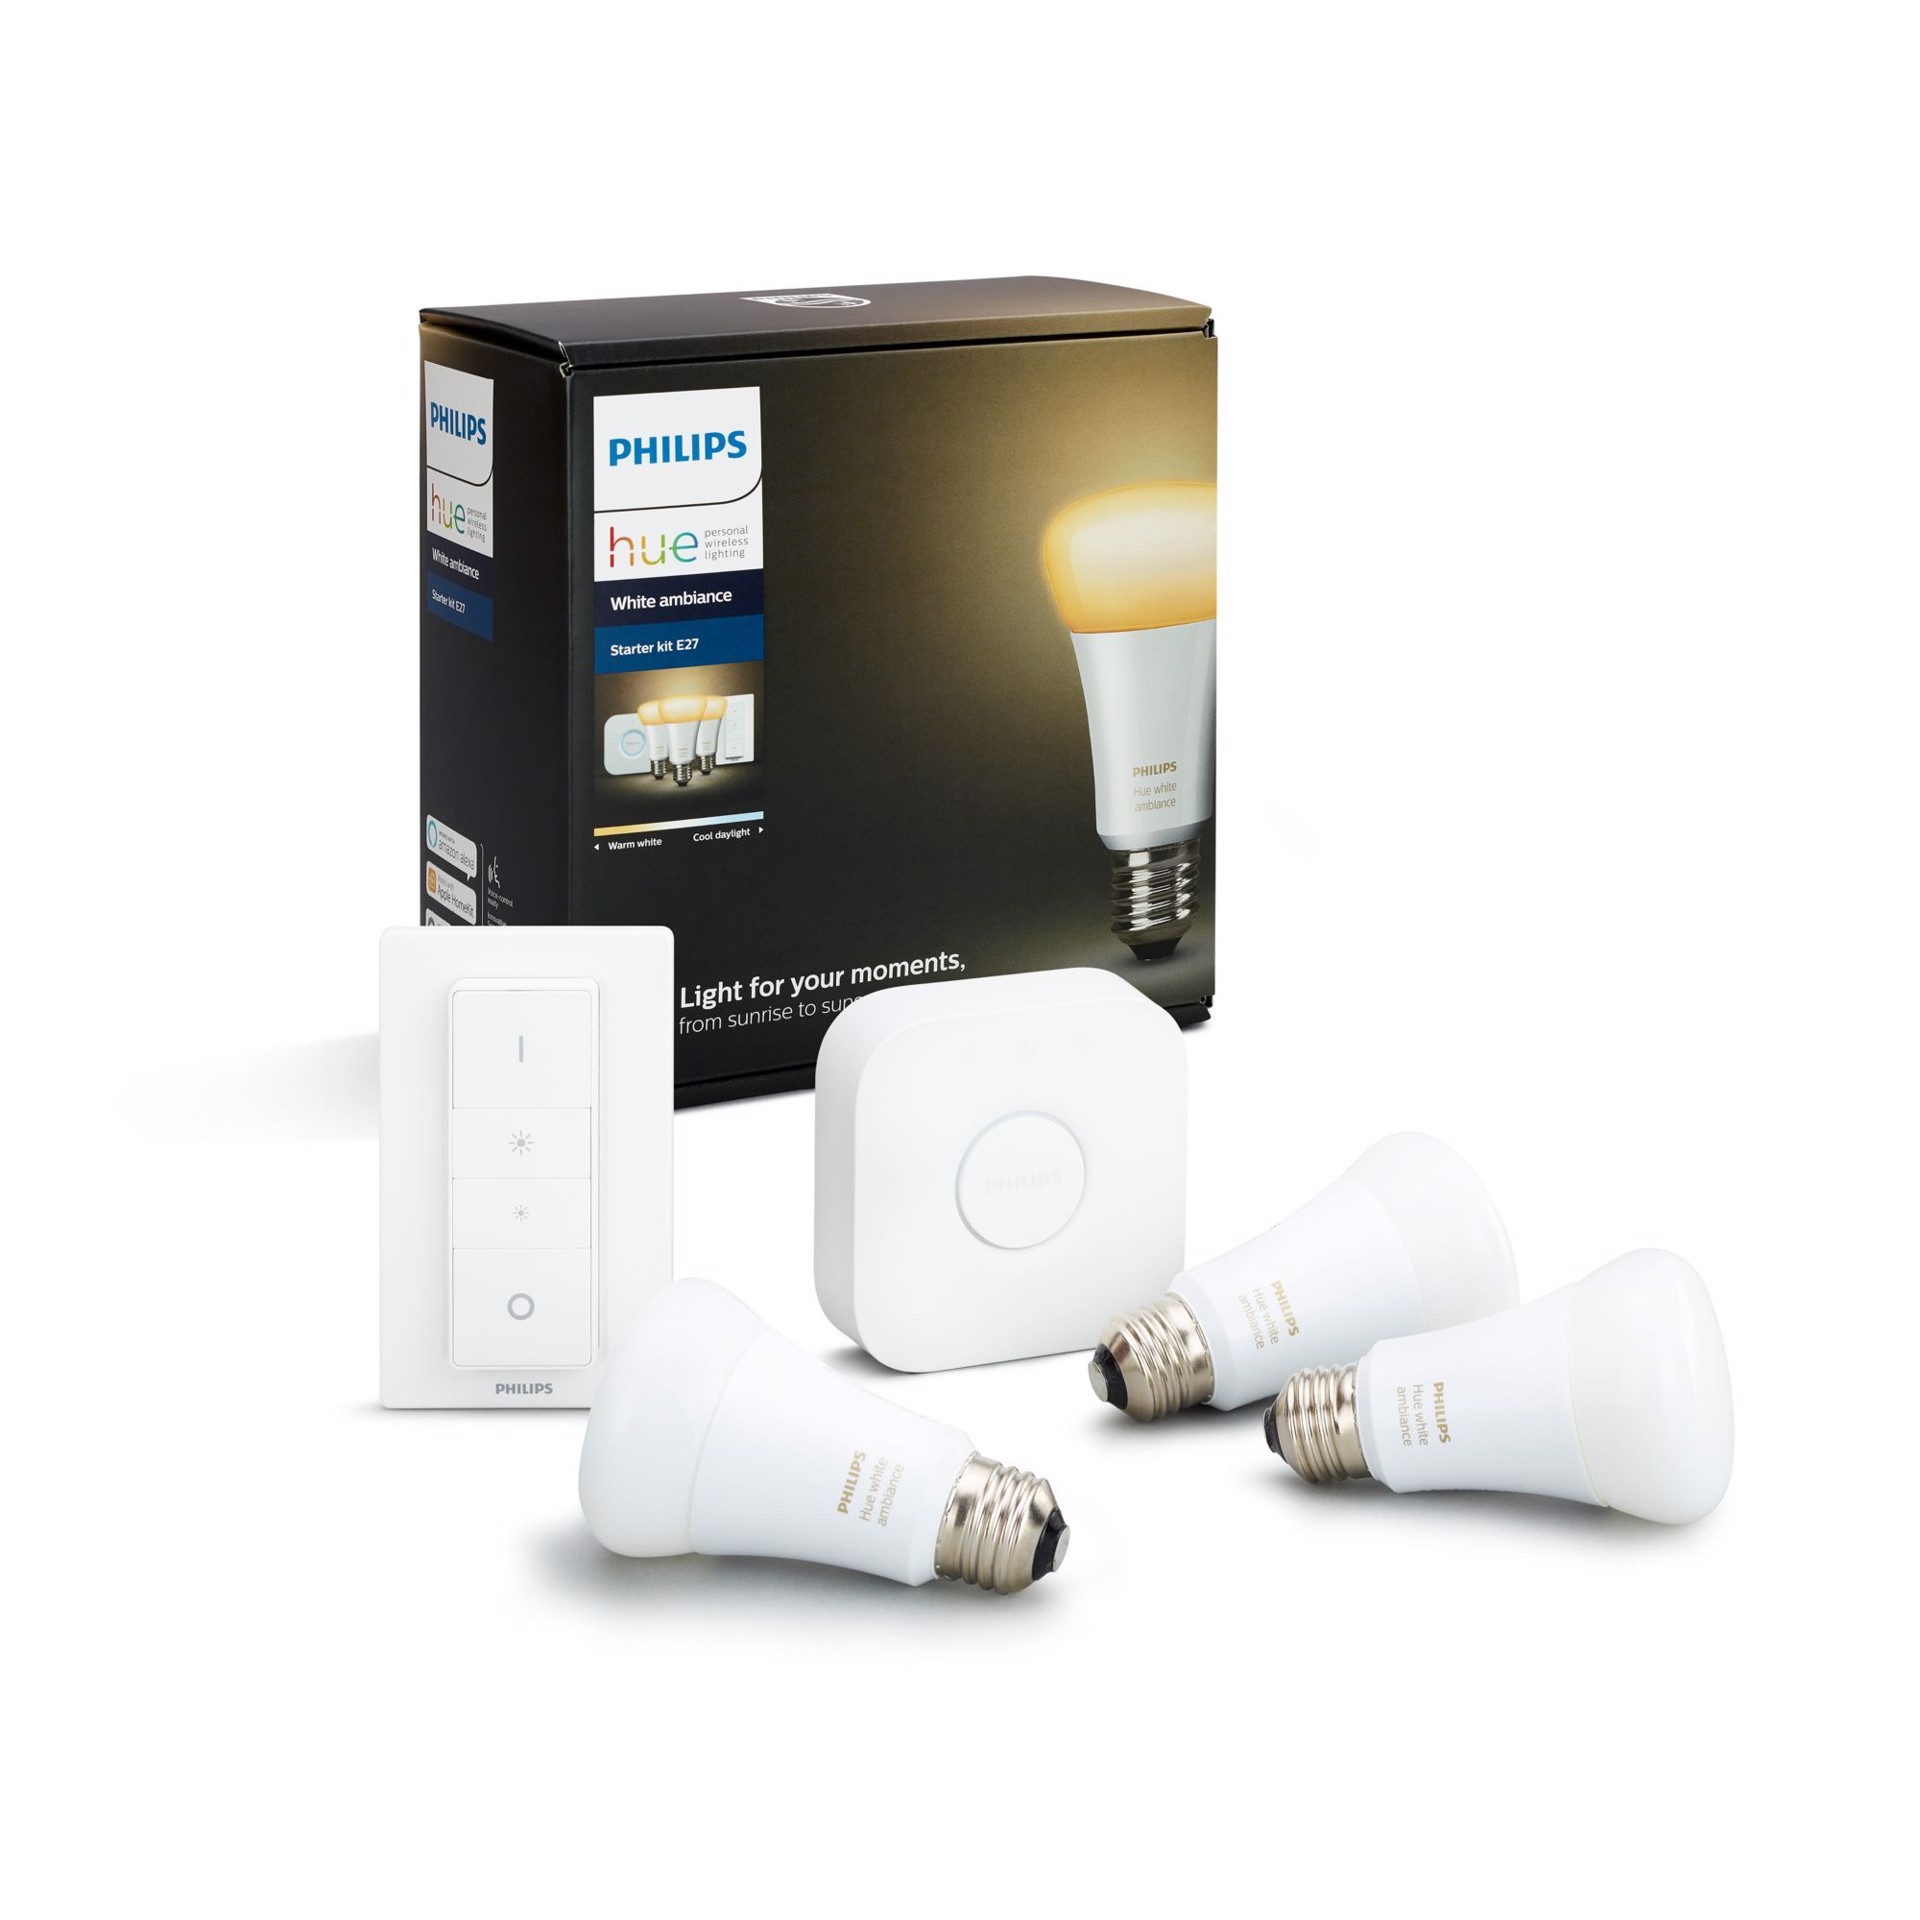 Philips by Signify Philips Hue White ambiance 3 x E27 bulb Starter